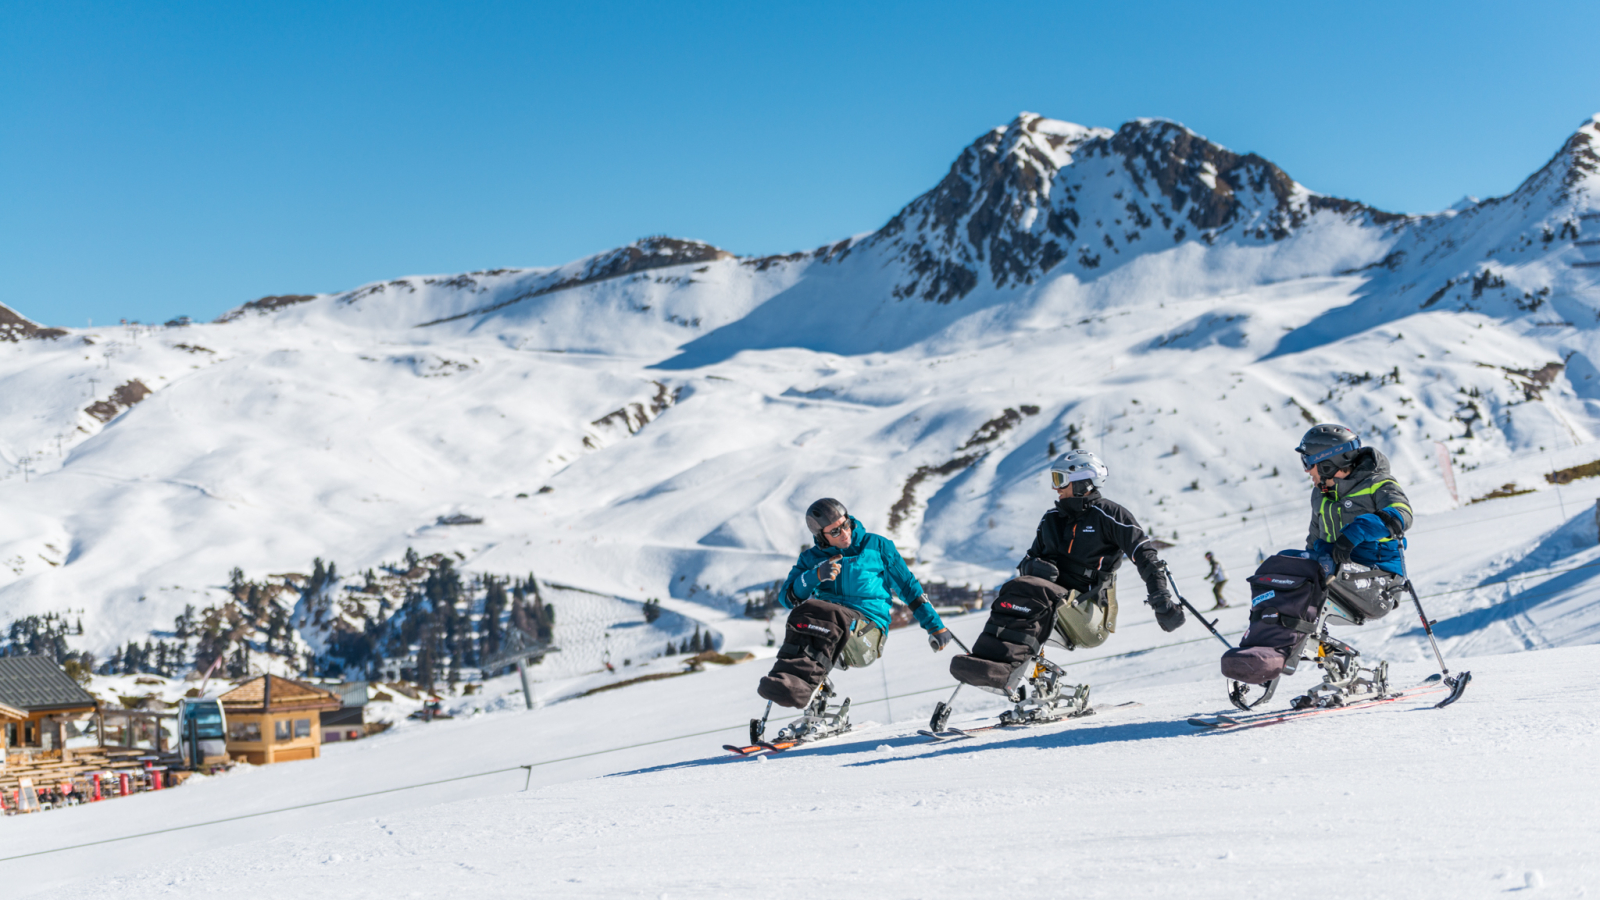 Trained specifically for adaptive-skiing, our instructors provide the most up-to-date and modern tuition to ensure you achieve your ski goals.